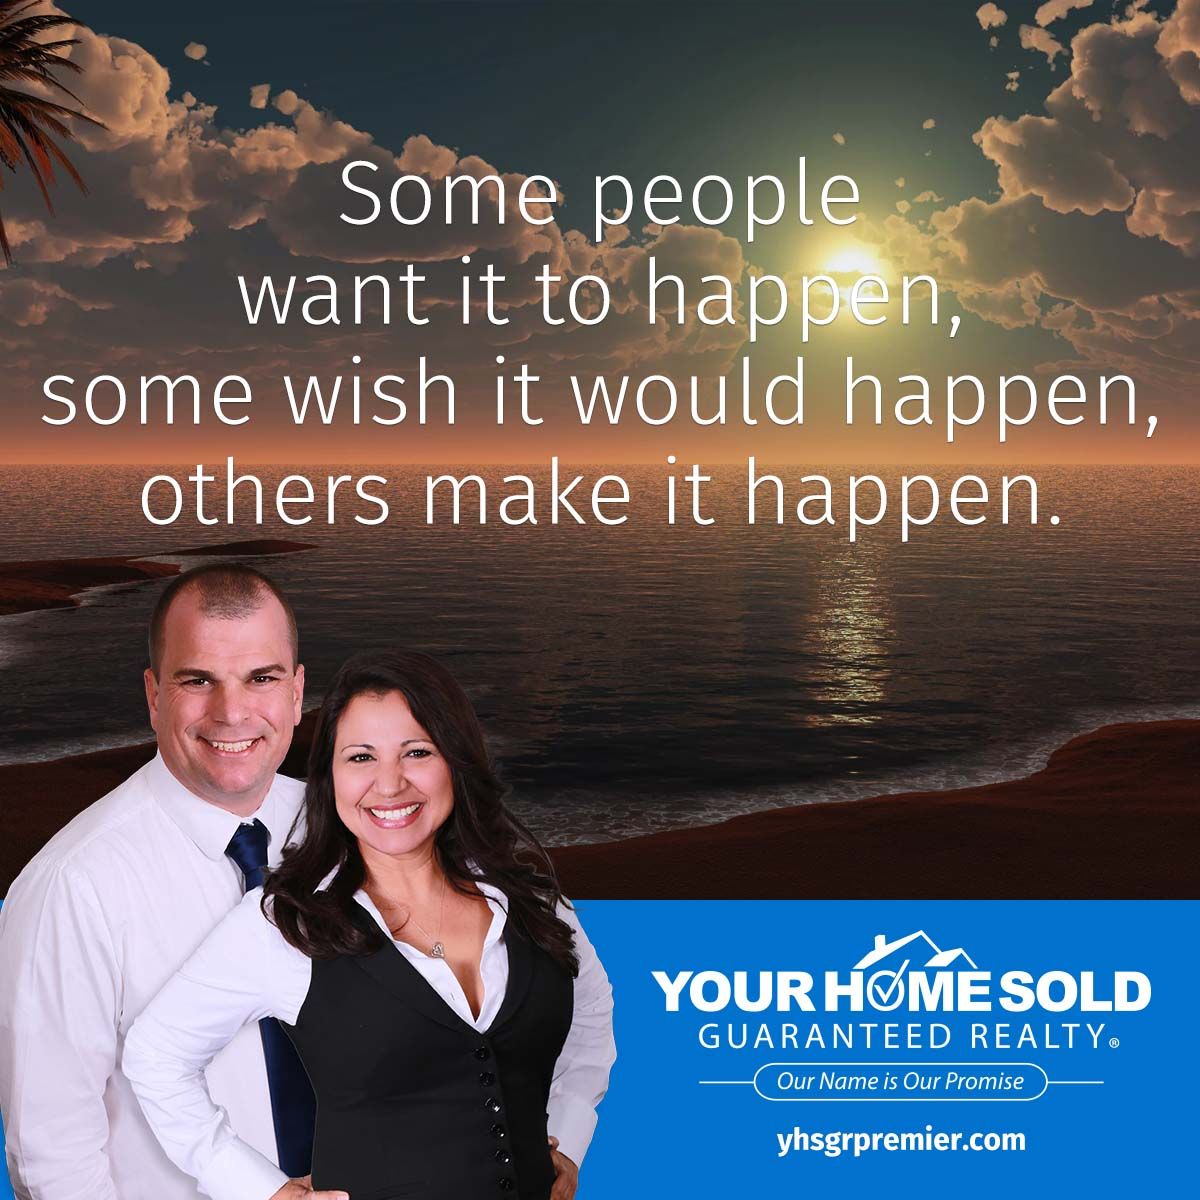 Some people want it to happen, some wish it would happen, other make it happen.

#realestate #realestateagent #realestateexpert #yourhomesoldguaranteed #orangecountyrealestate #anaheimrealestate #orangecountyrealtor #realestatetips #motivationalmonday